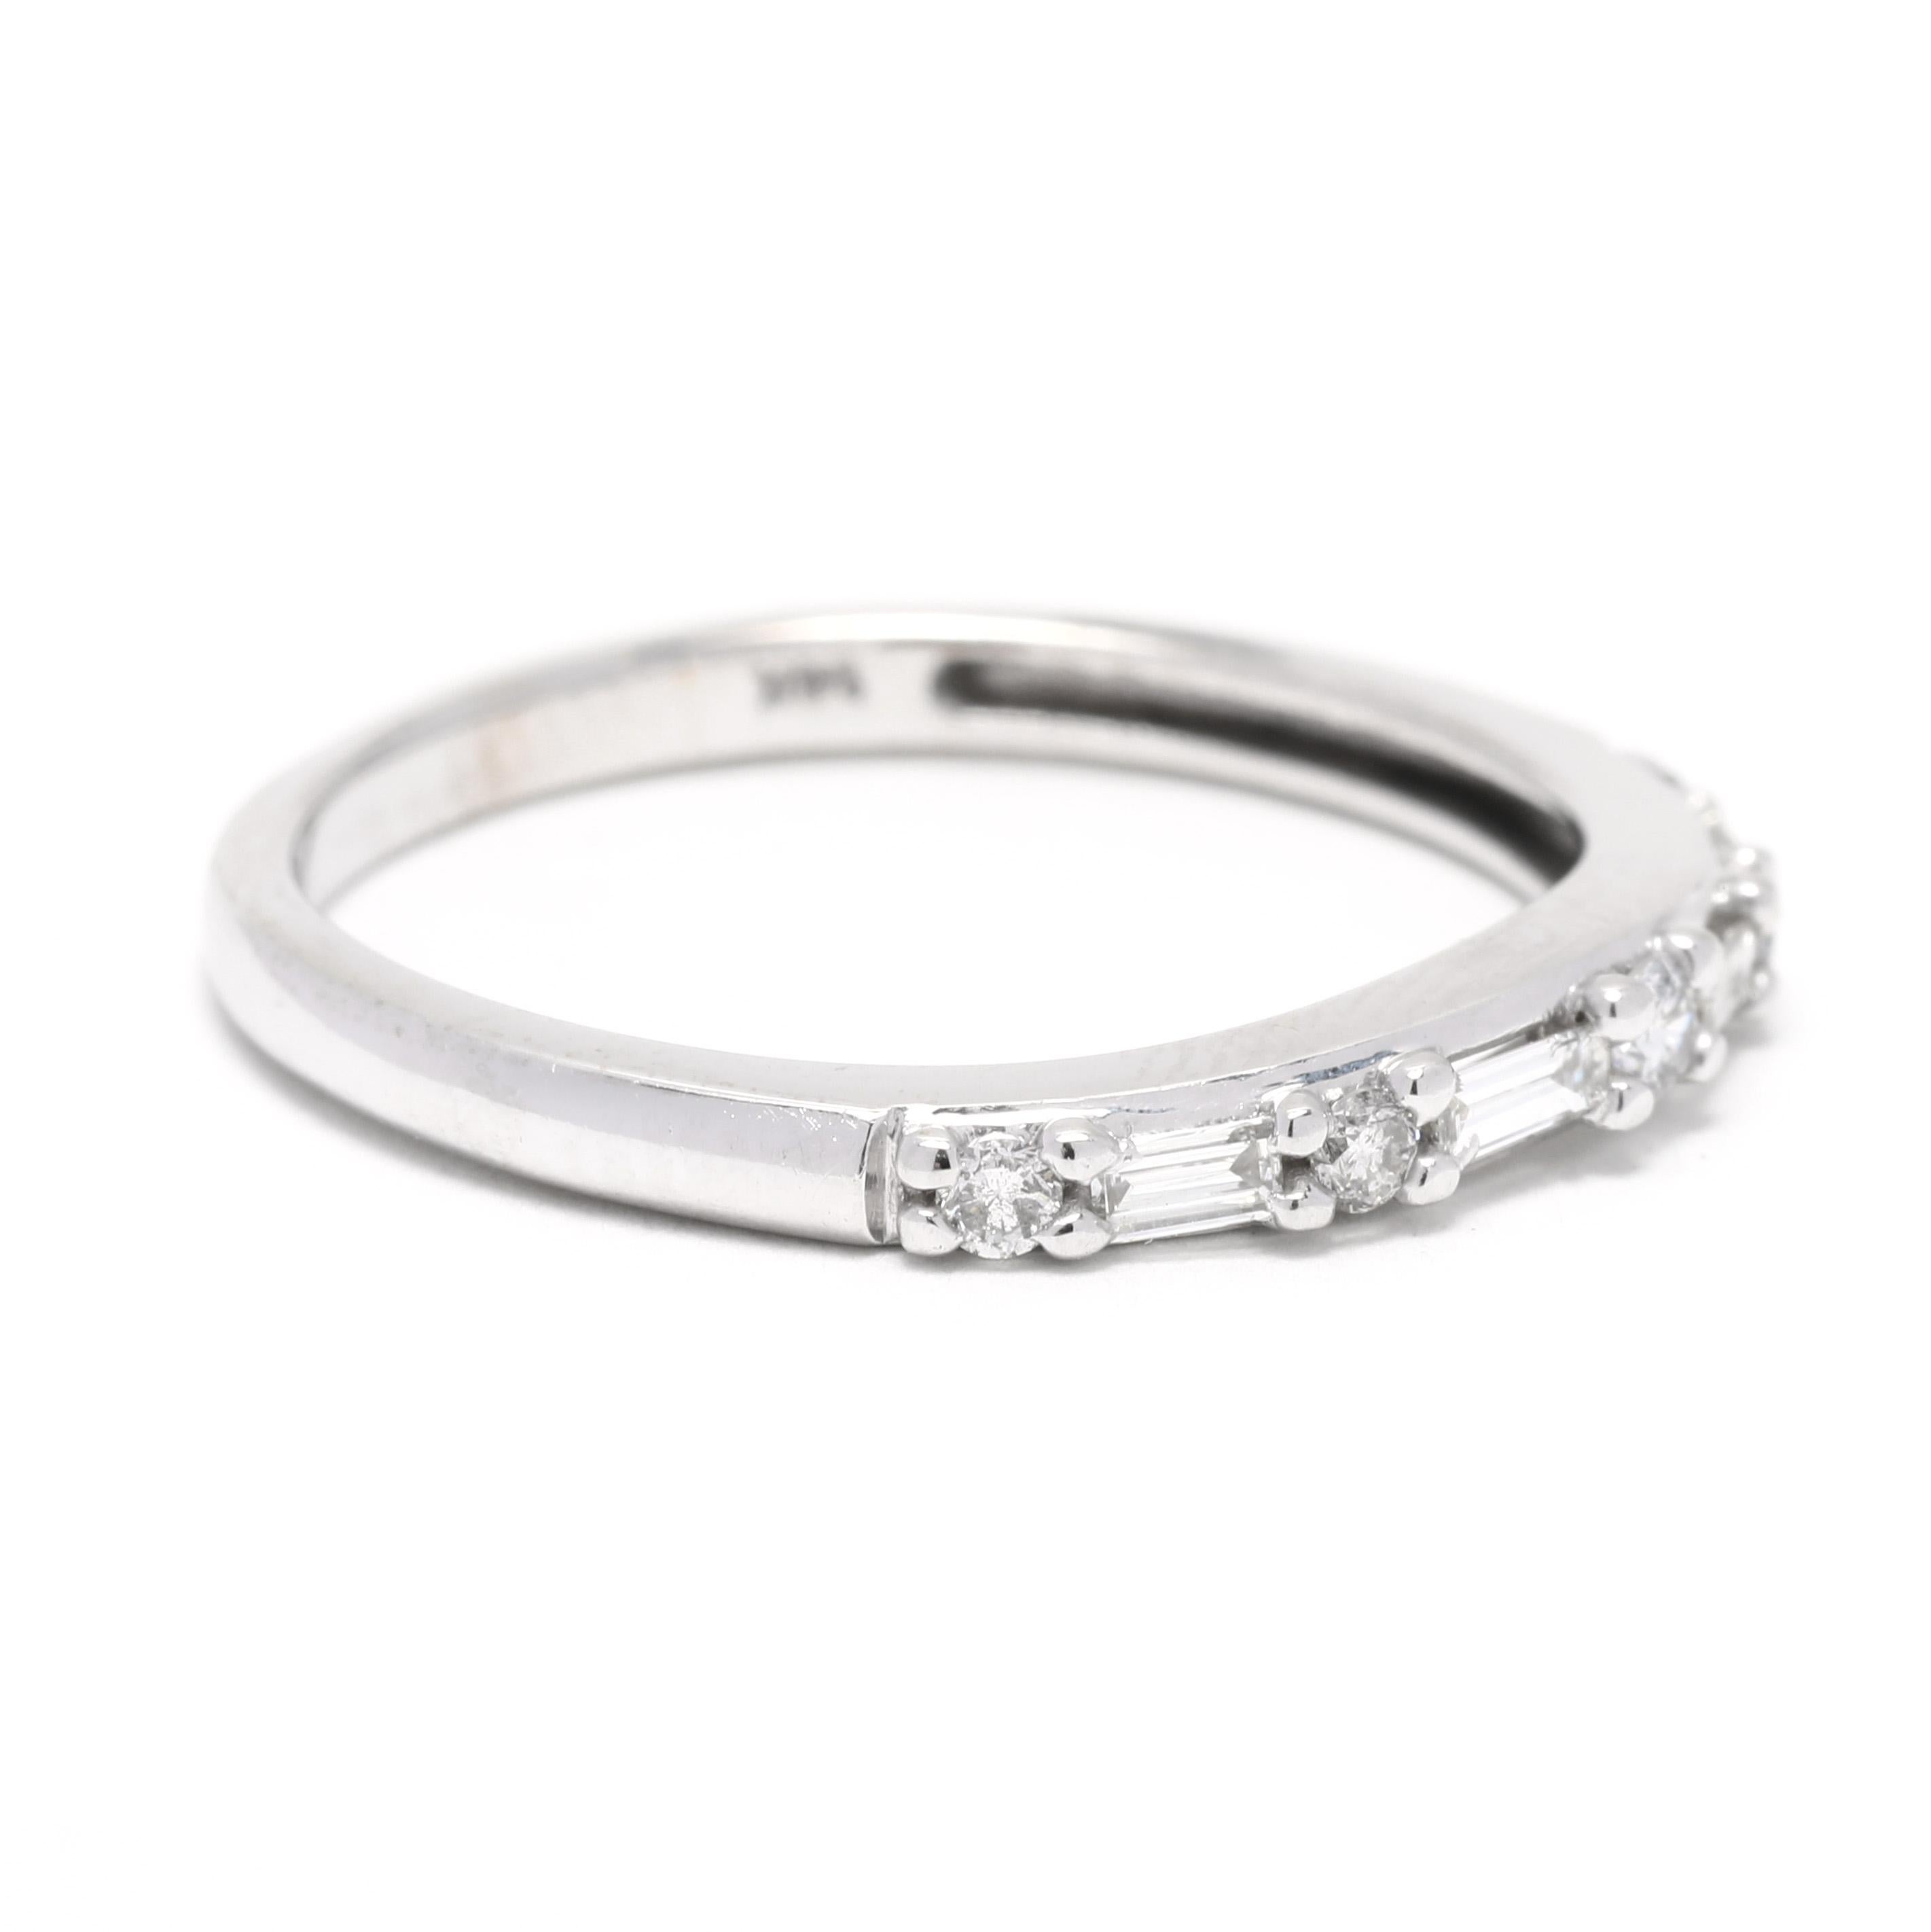 This beautiful and delicate curved diamond wedding band is a perfect choice for stacking or wearing on its own. Crafted in 14K white gold, this ring features a total carat weight of 0.30, with round and baguette-cut diamonds. The curved design adds